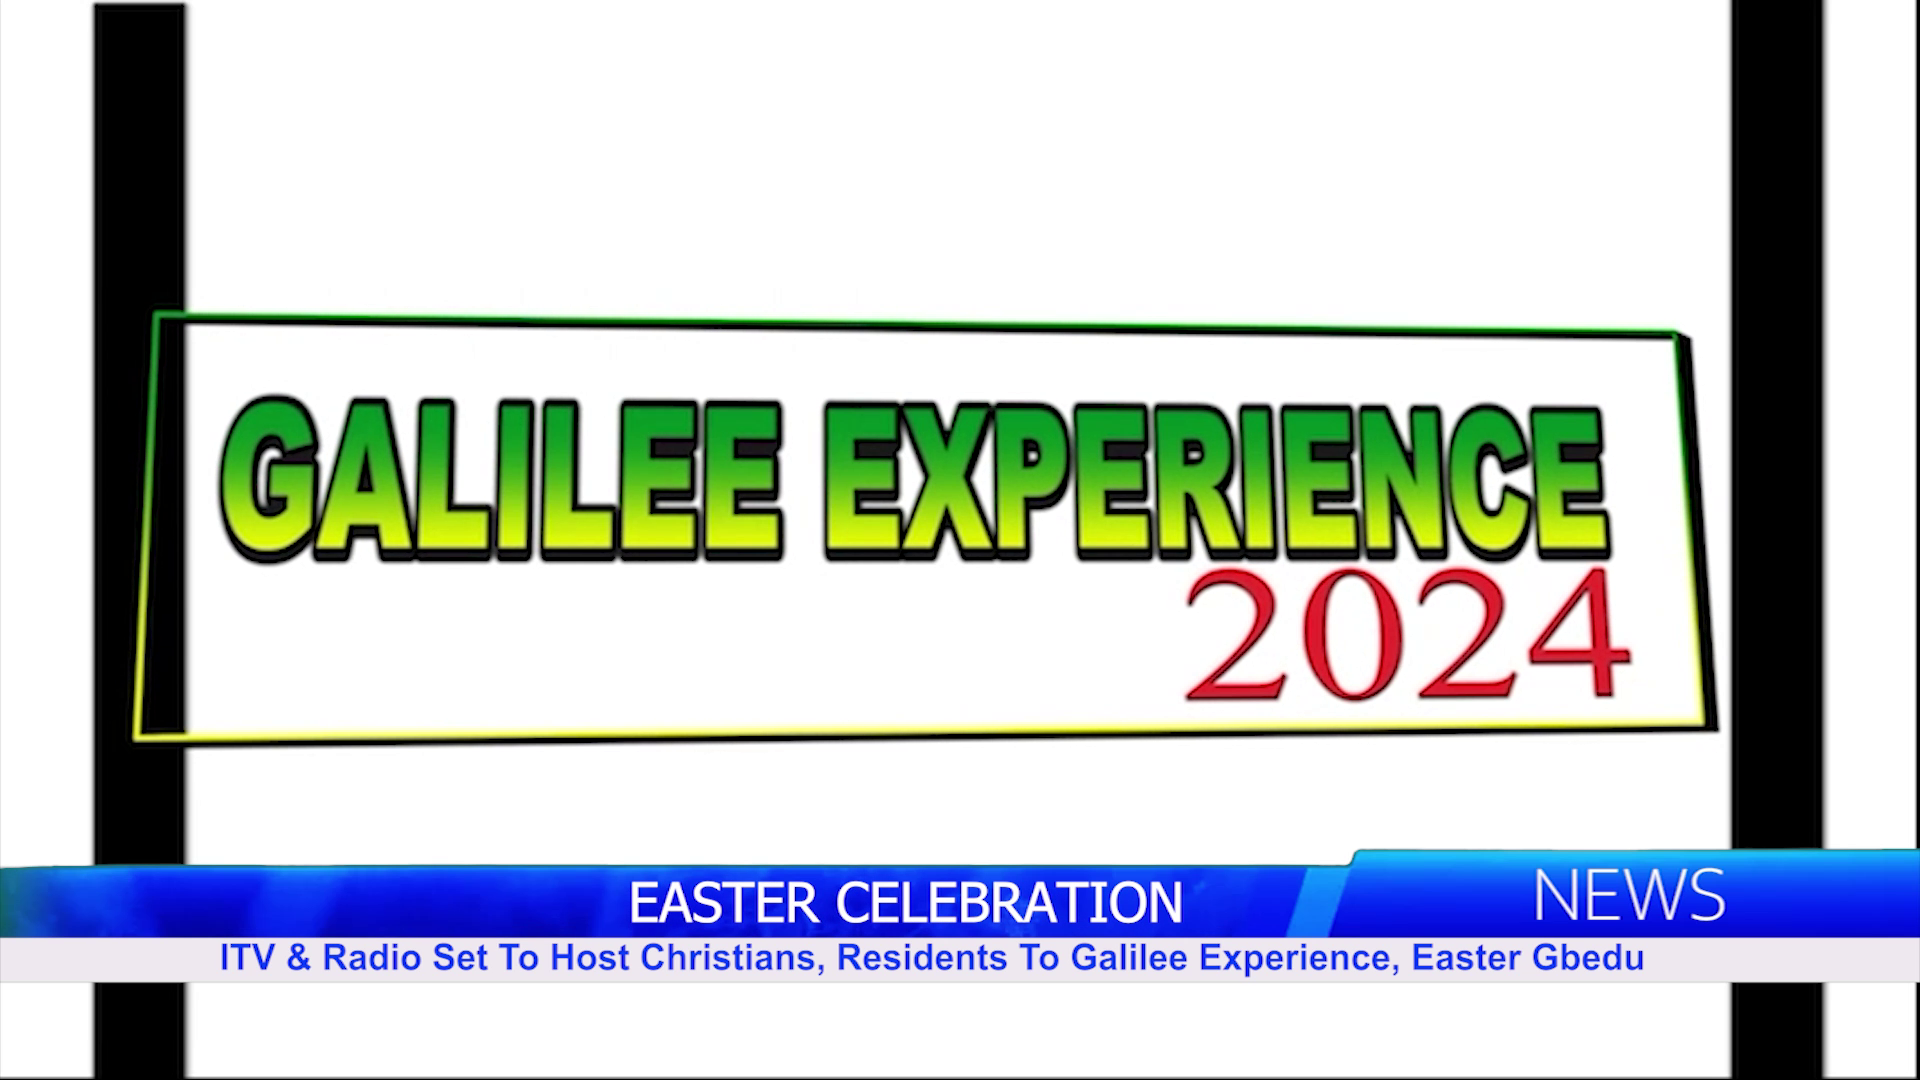 ITV & Radio Set To Host Christians, Residents To Galilee Experience, Easter Gbedu